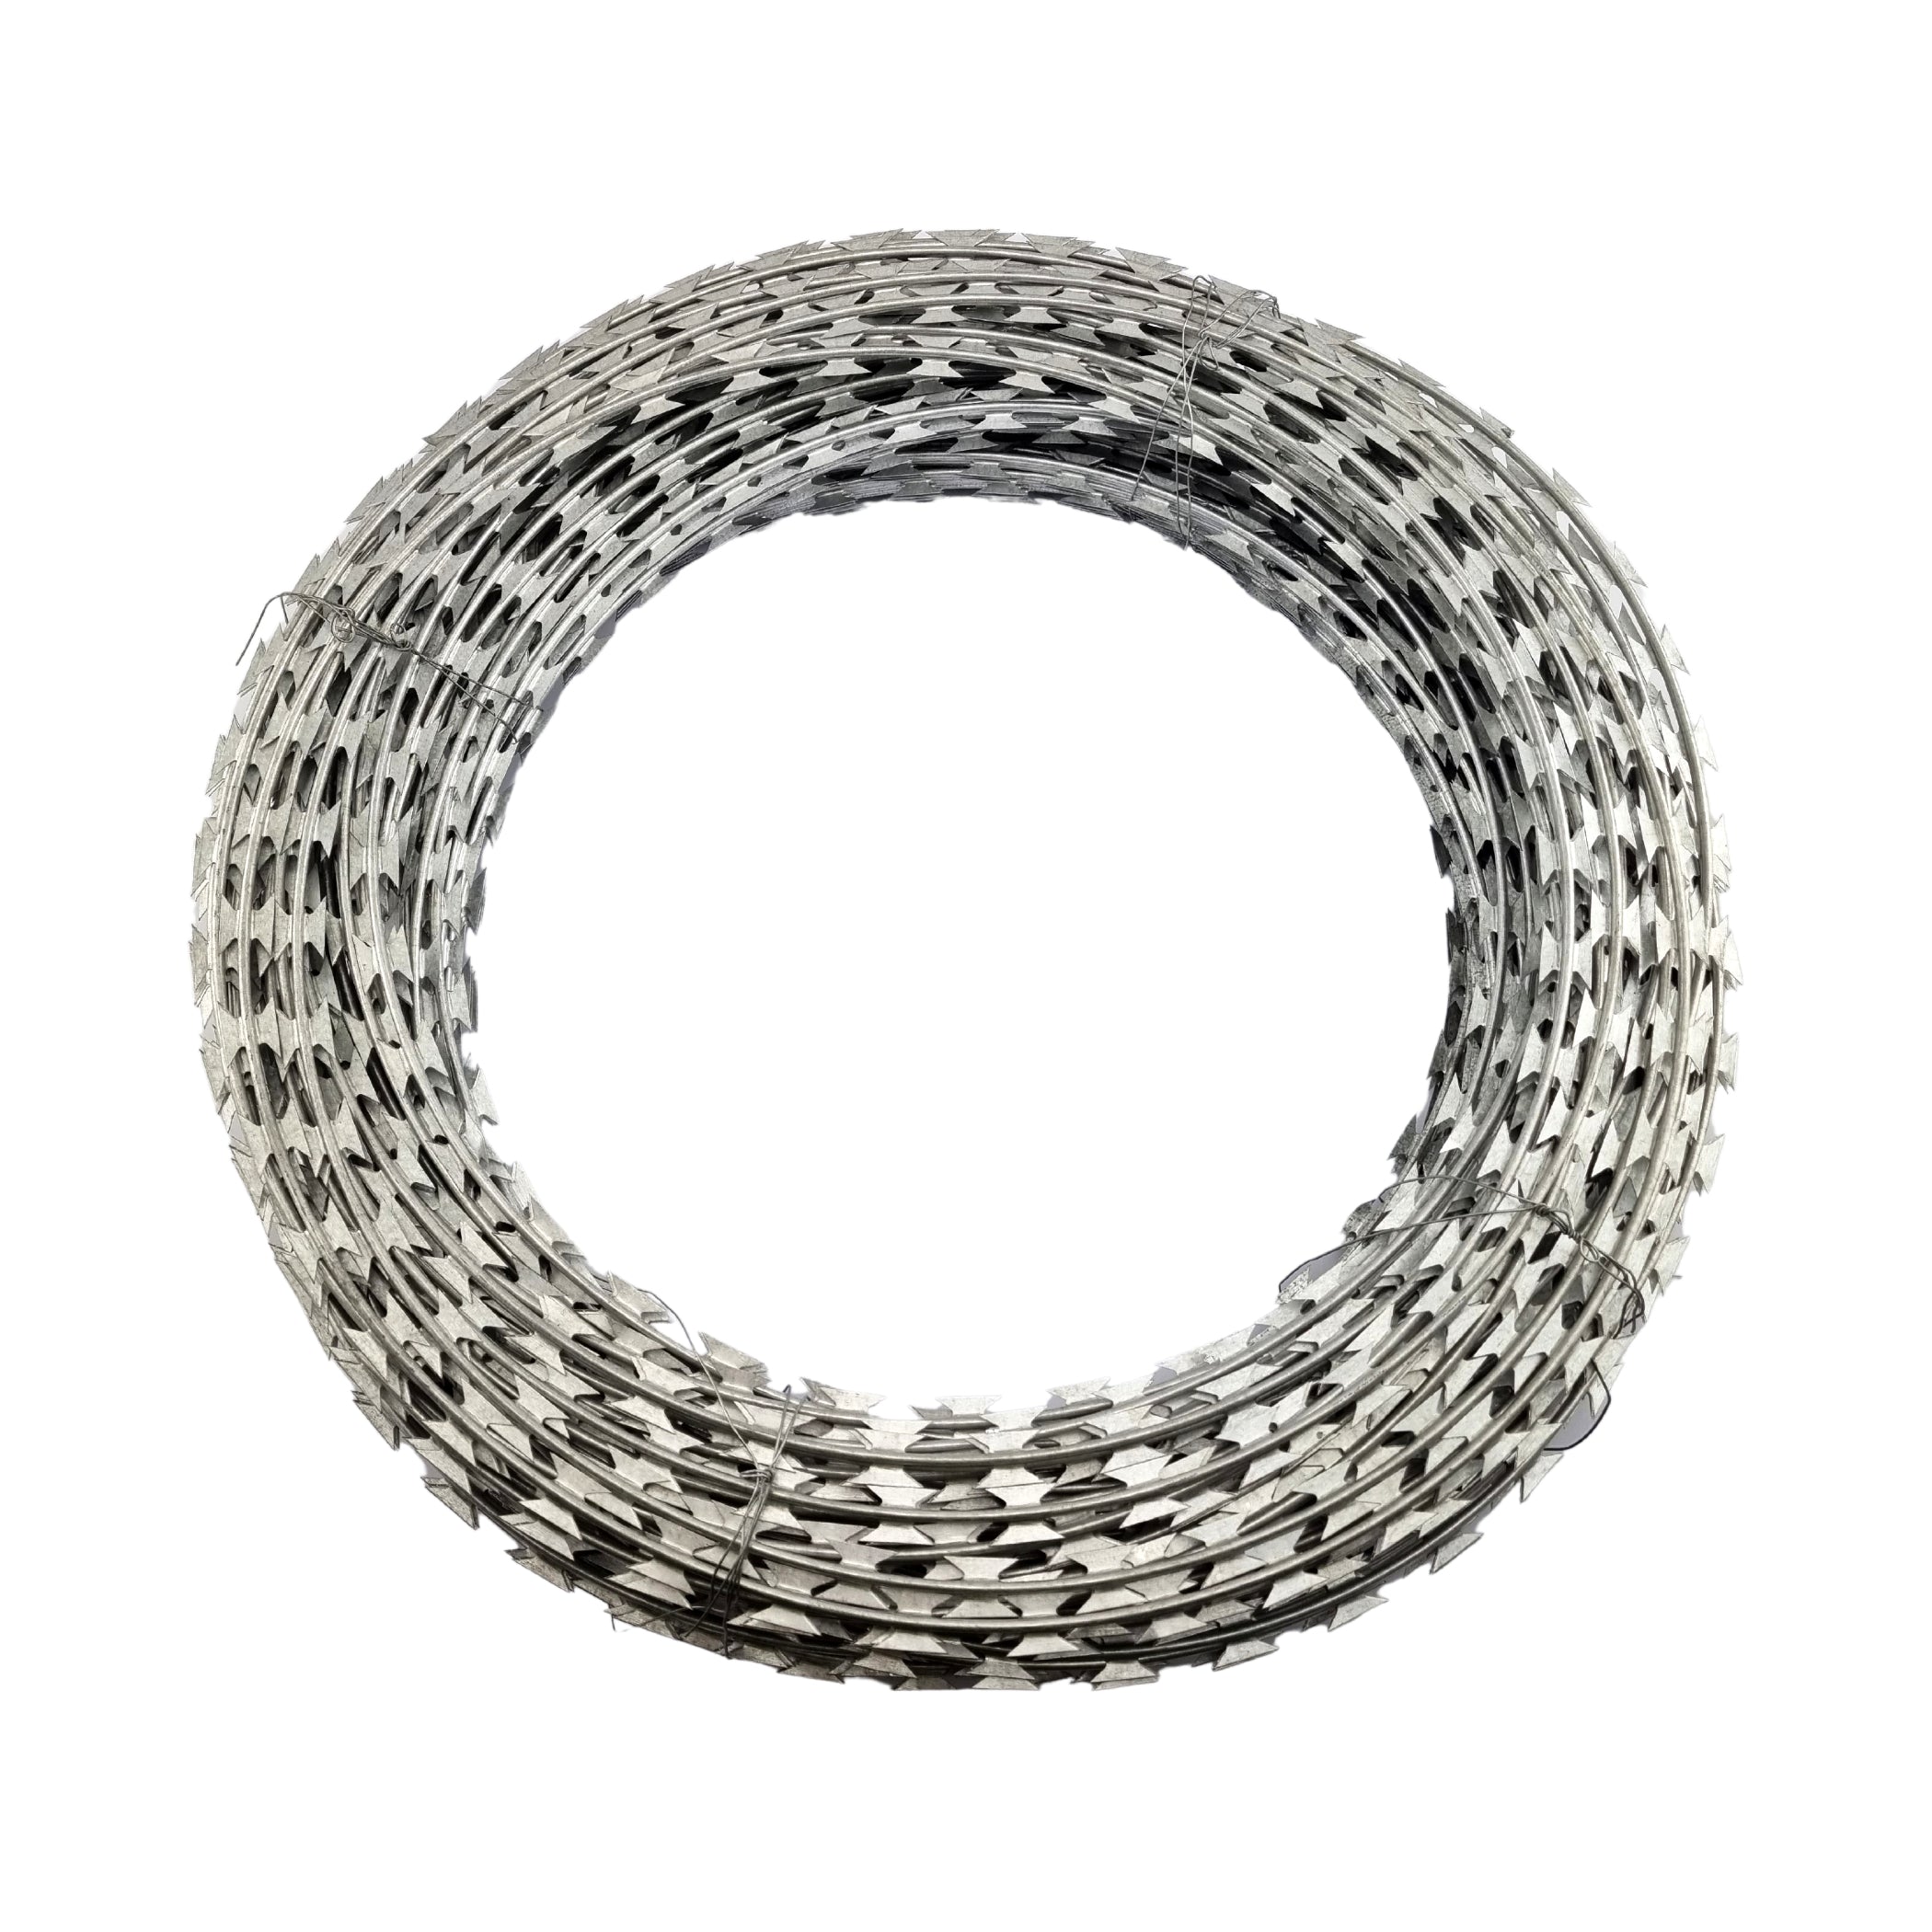 Galvanised razor wire in style BTO22. 100m coil or rings. Australia wide shipping or Melbourne pick-up. Shop razor wire and fencing chain.com.au.